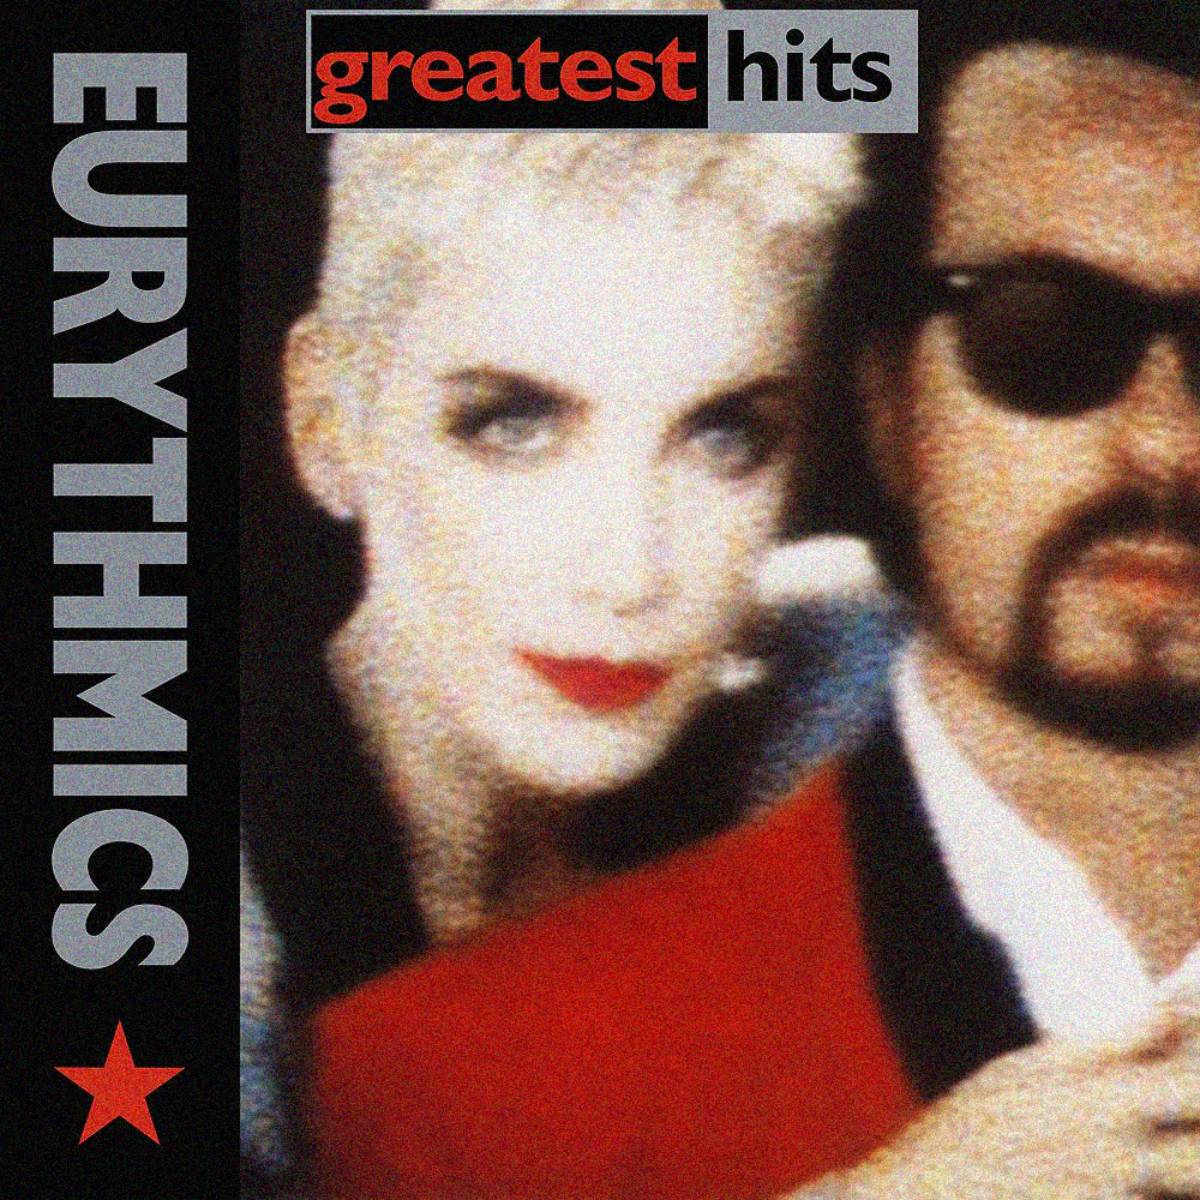 "Greatest Hits" (Eurythmics hits compilation cover)